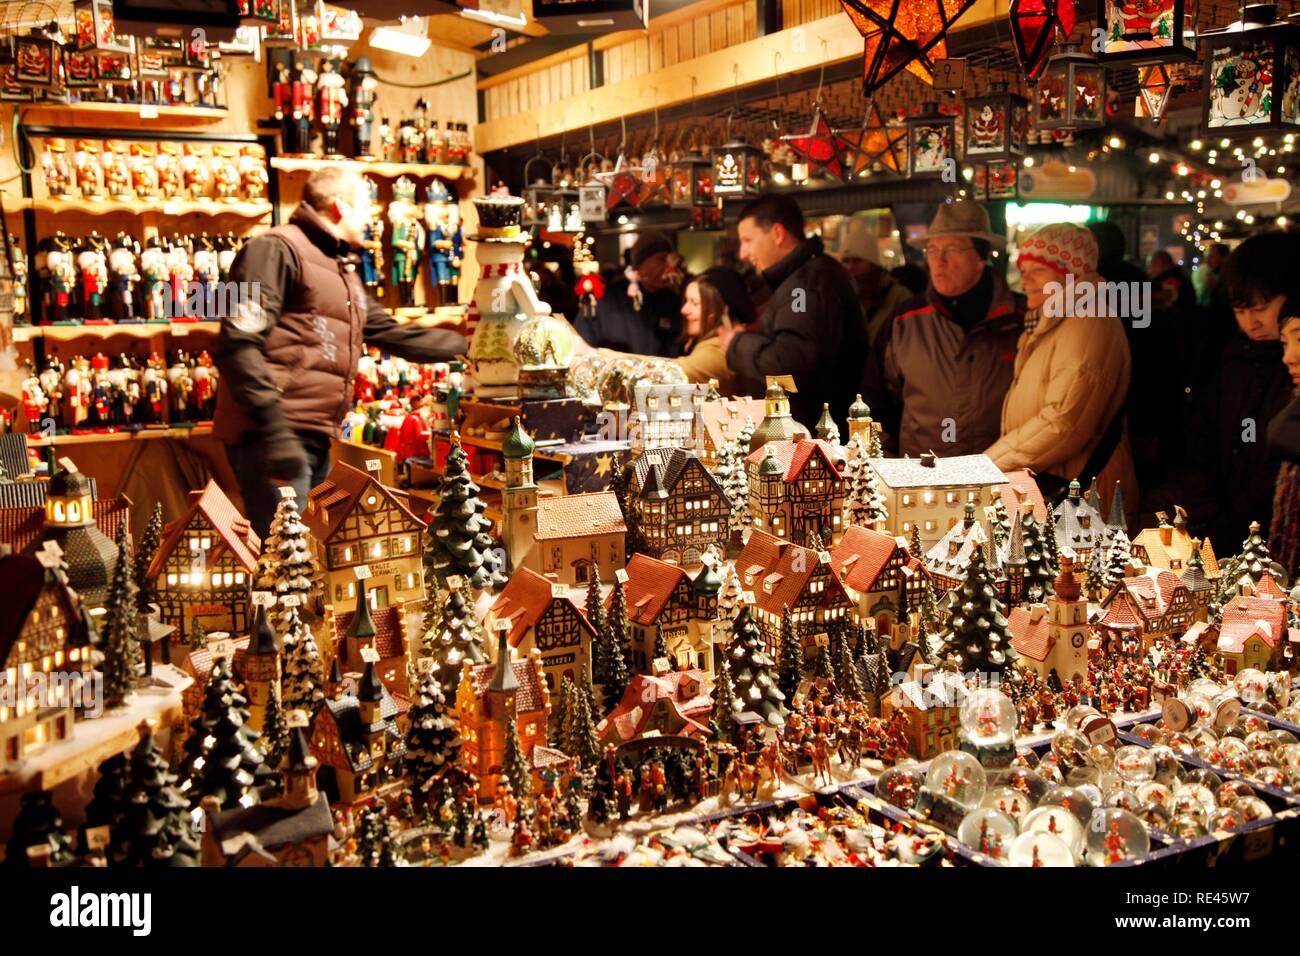 Miniature houses, figurines, Christmas village, Christmas market at the cathedral, old town, Salzburg, Austria, Europe Stock Photo